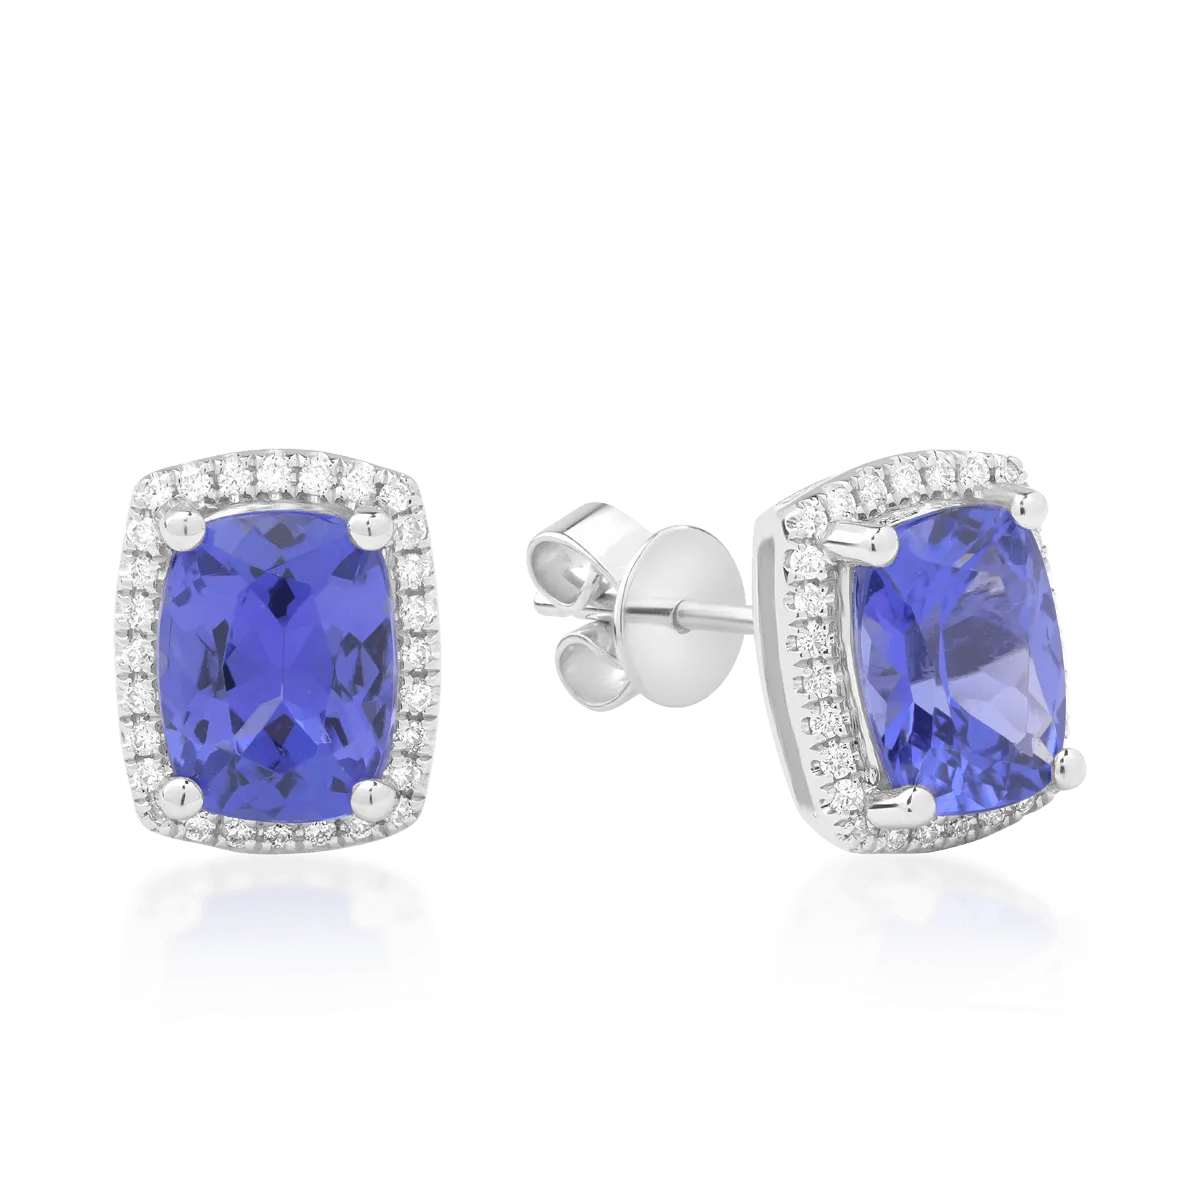 14K white gold earrings with 2.7ct tanzanite and 0.14ct diamonds